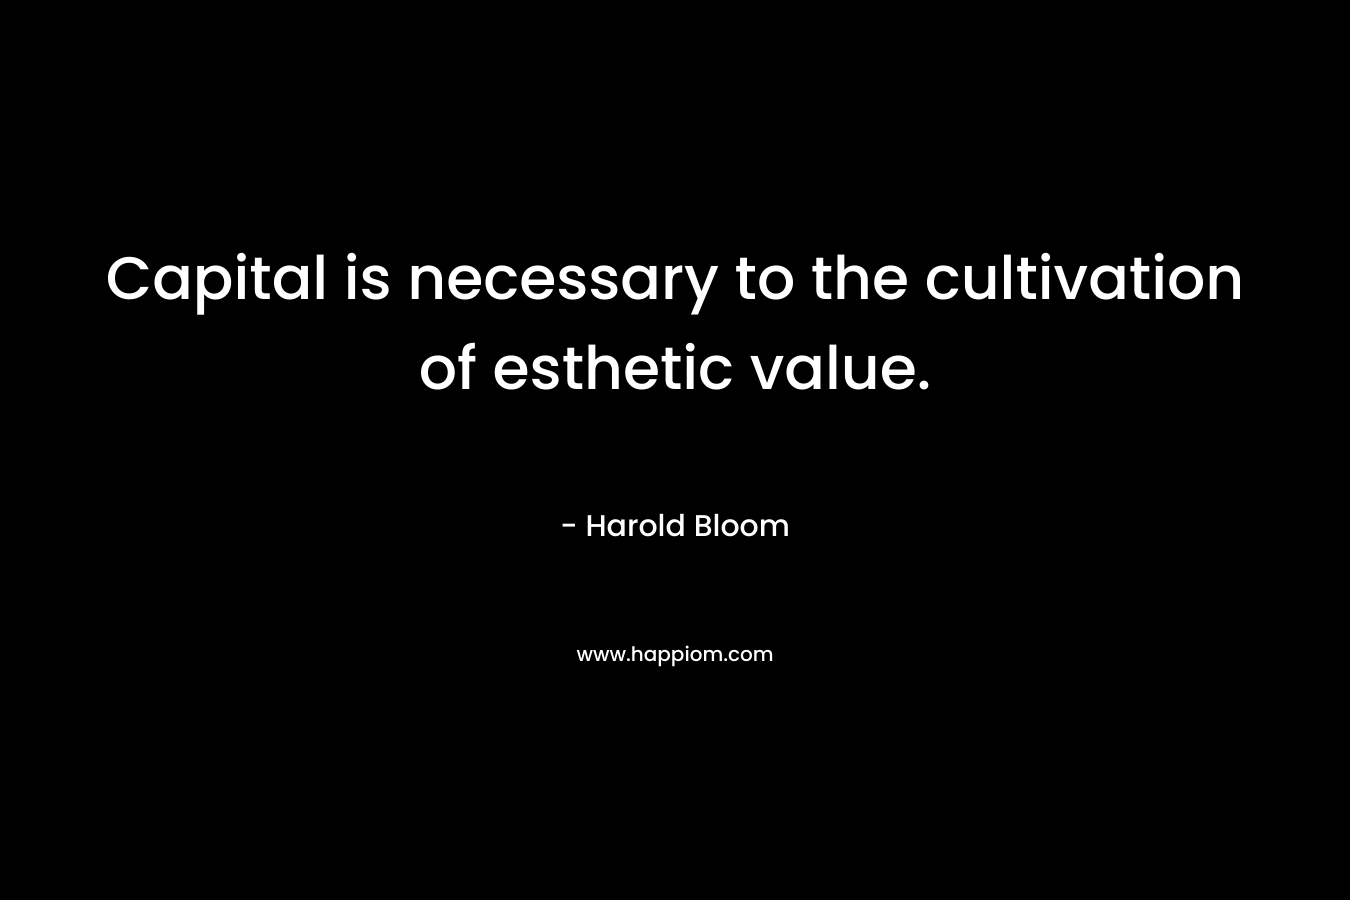 Capital is necessary to the cultivation of esthetic value.